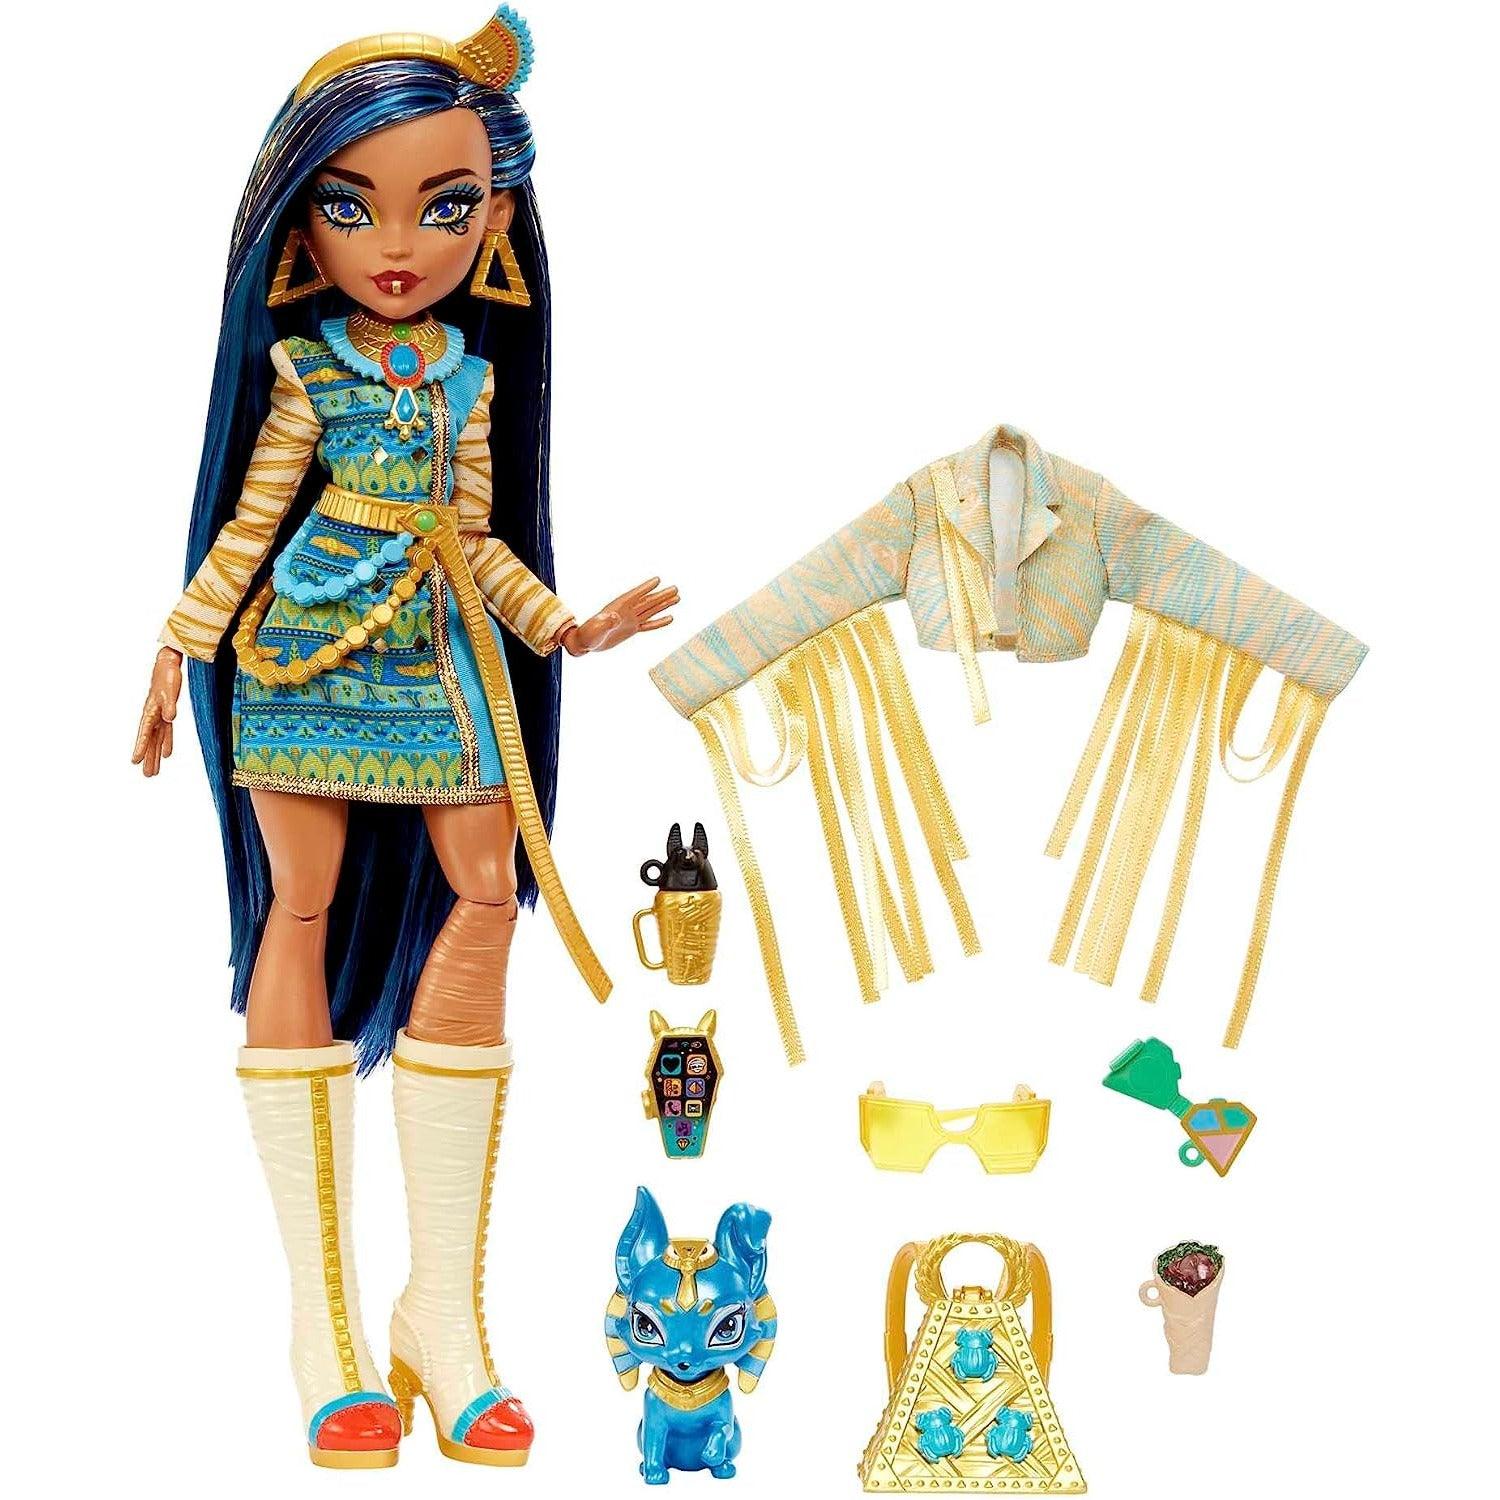 Mattel Monster High Cleo De Nile Fashion Doll with Blue Streaked Hair, Signature Look, Accessories & Pet Dog